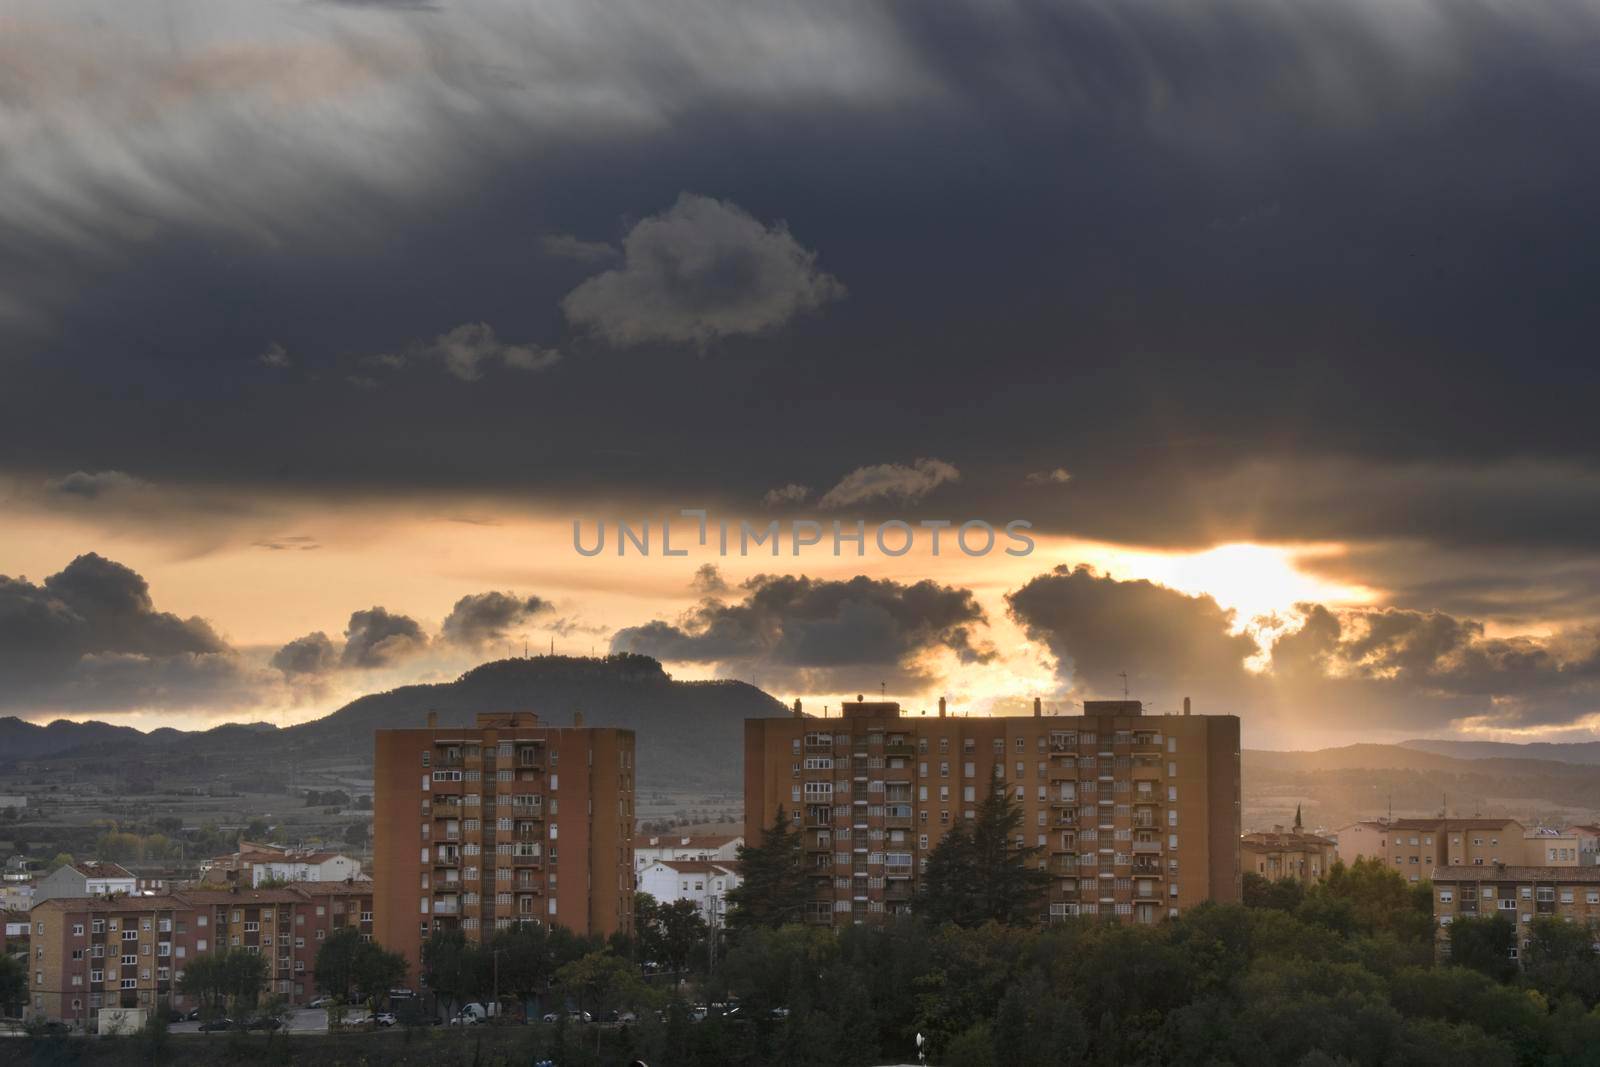 Cloudy sunset over some apartment buildings and a mountain behind in Igualada, a city in Barcelona province